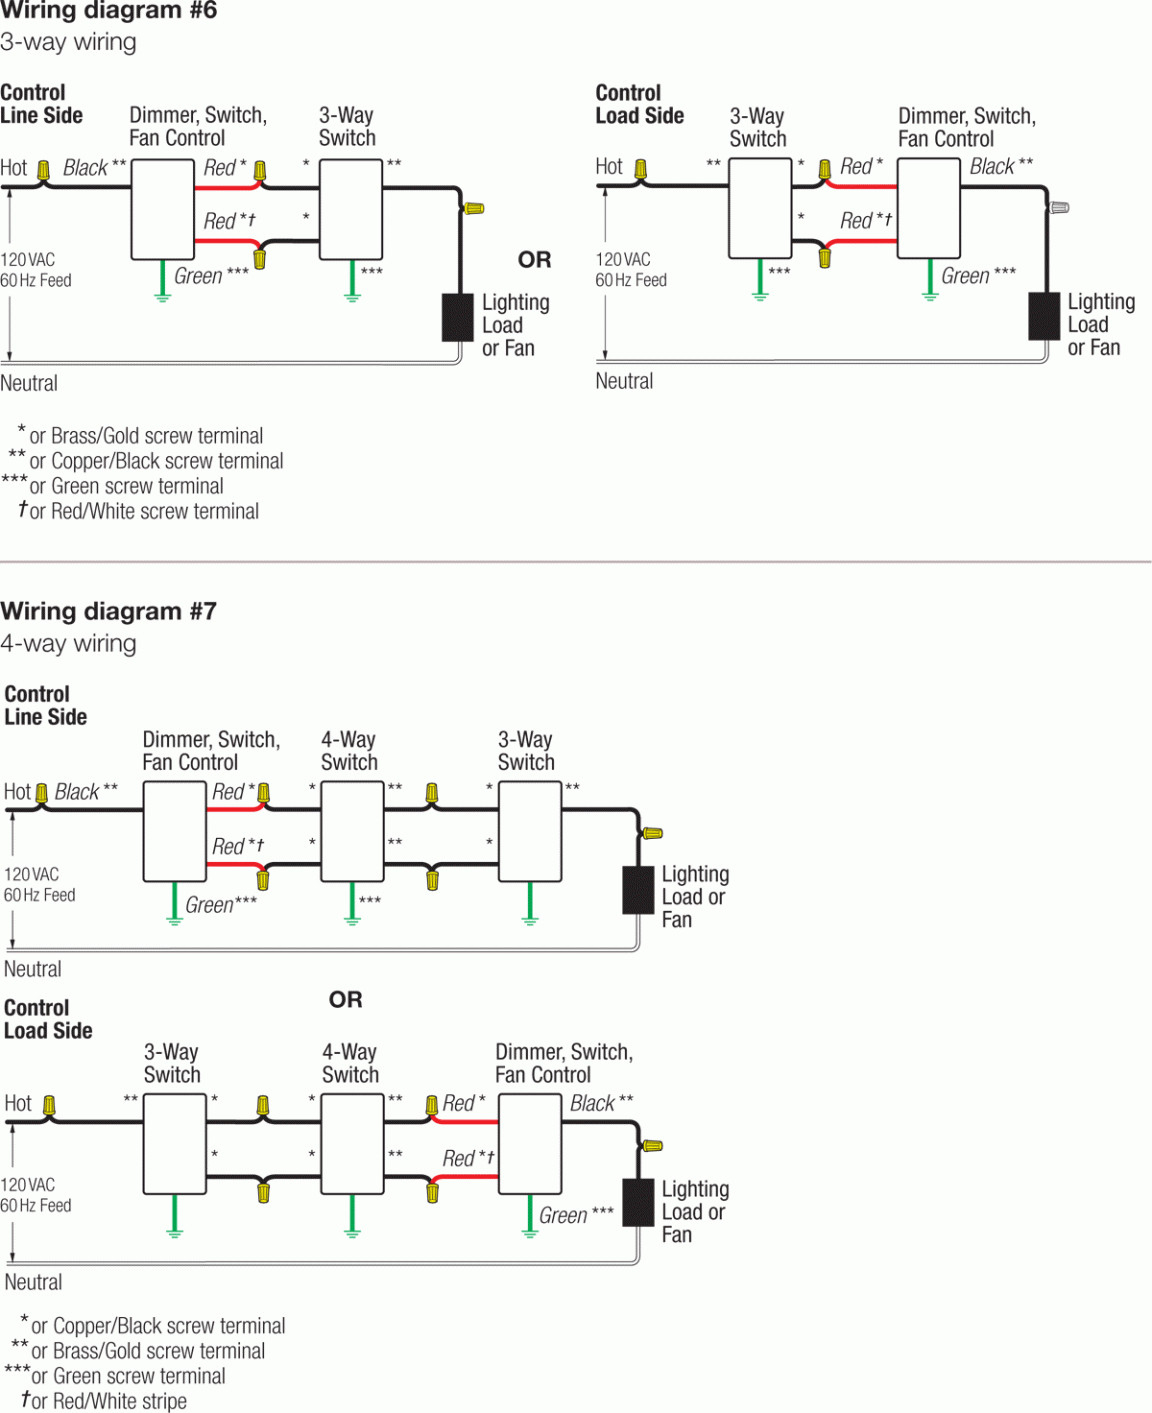 Lutron Wire Diagram - Wiring Diagrams Hubs - Lutron 3 Way Switch Wiring Diagram